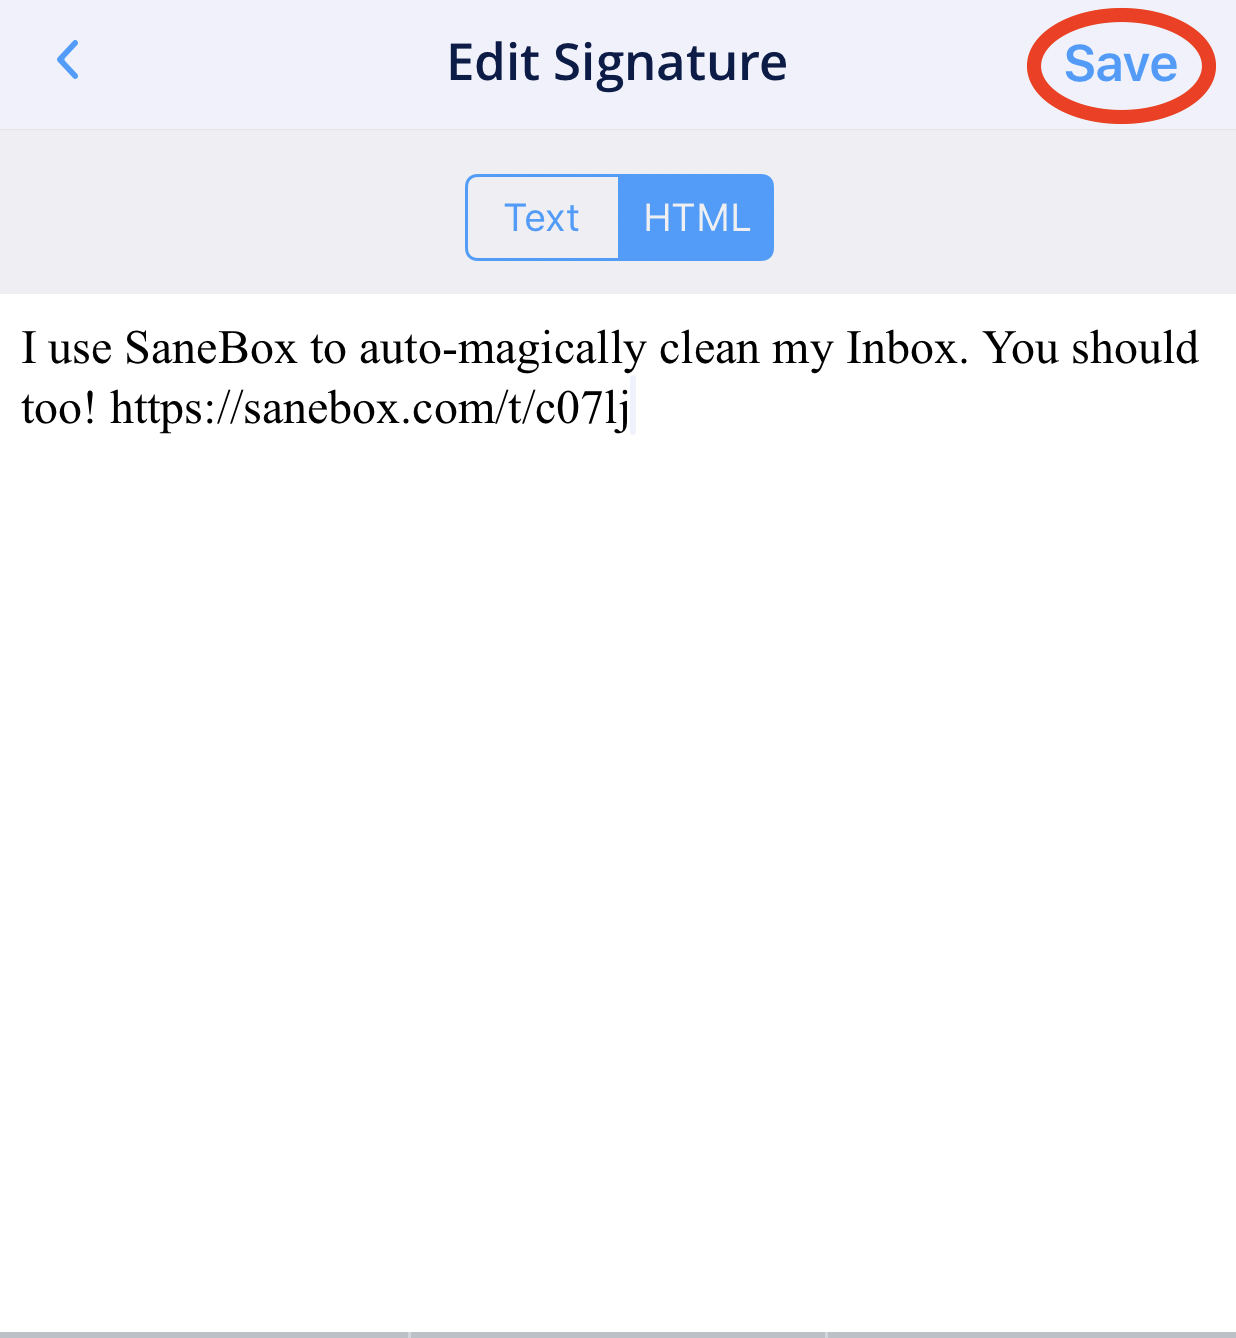 Saving a new signature in Spark